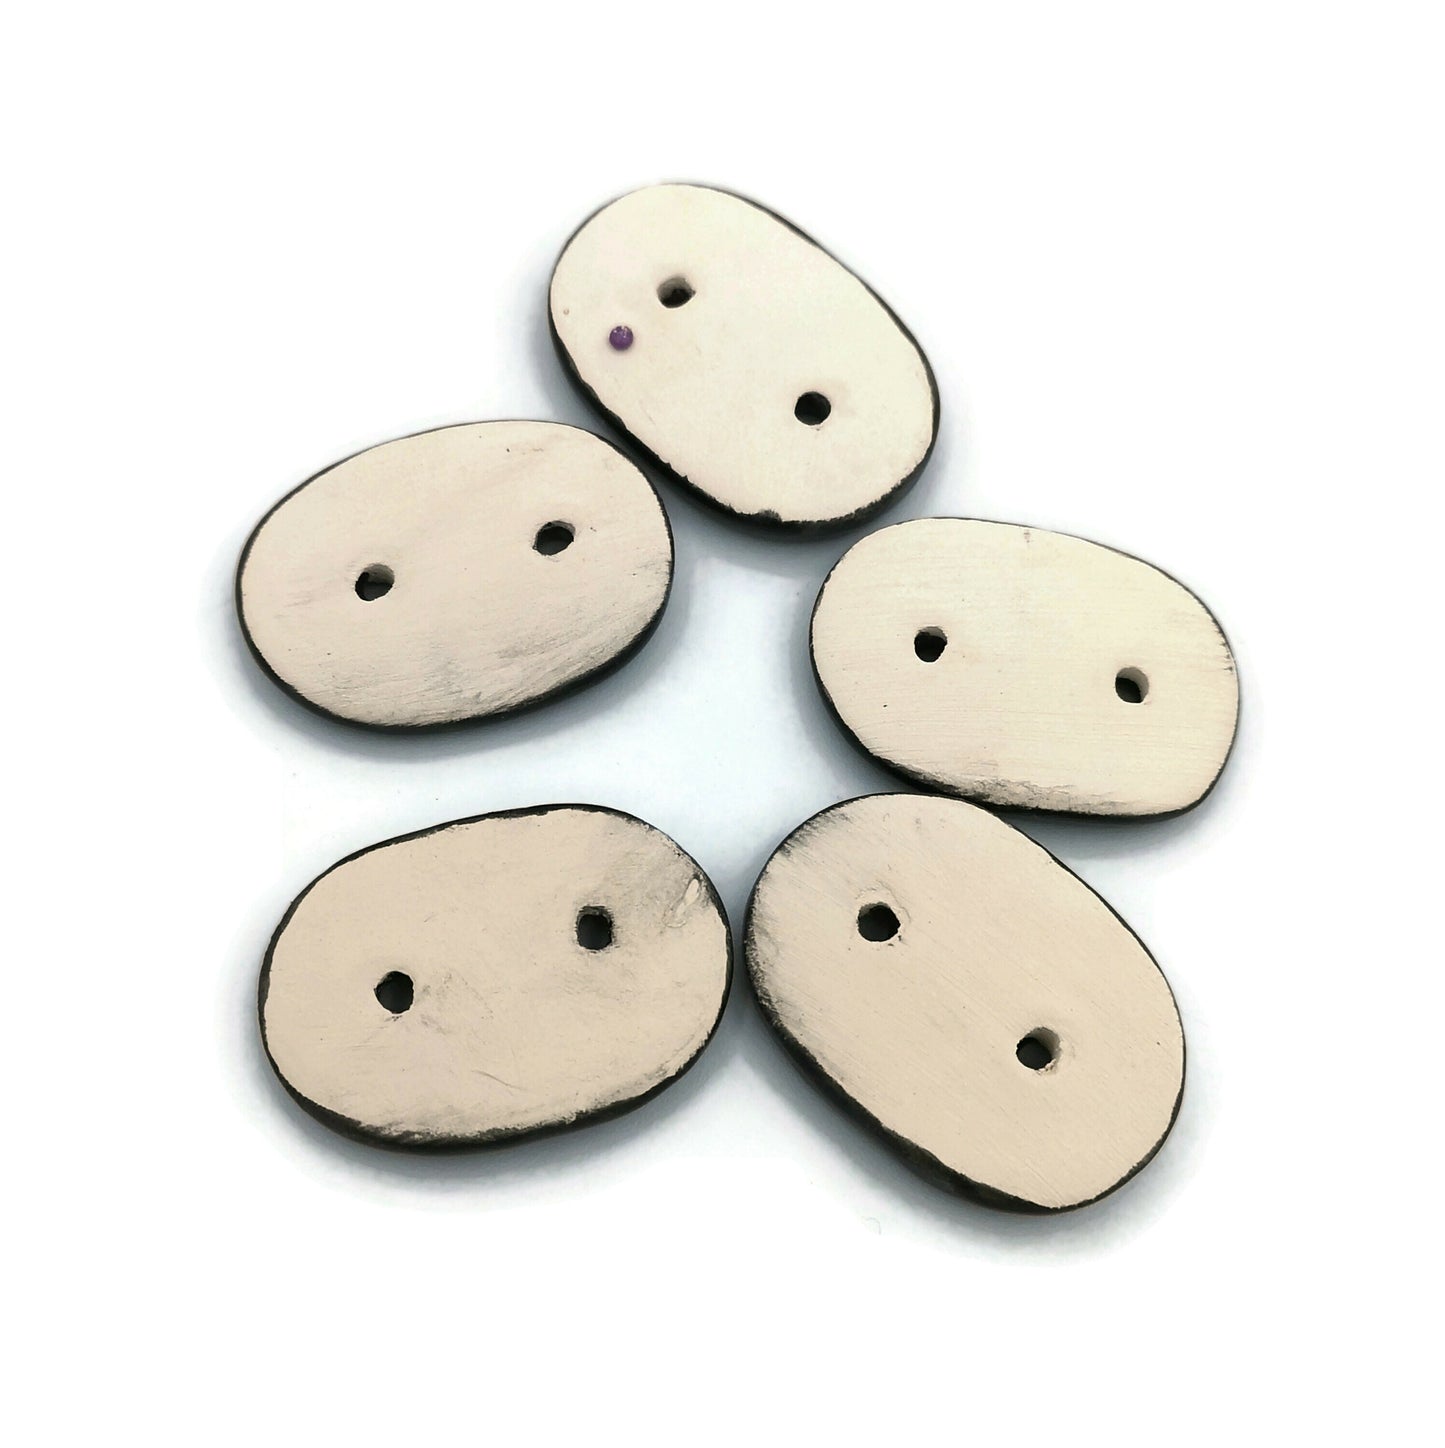 5Pcs 35mm Glossy Black Handmade Ceramic Oval Sewing Buttons, Extra Large Coat Buttons, Fancy Buttons, Clothing Embellishments, best sellers - Ceramica Ana Rafael